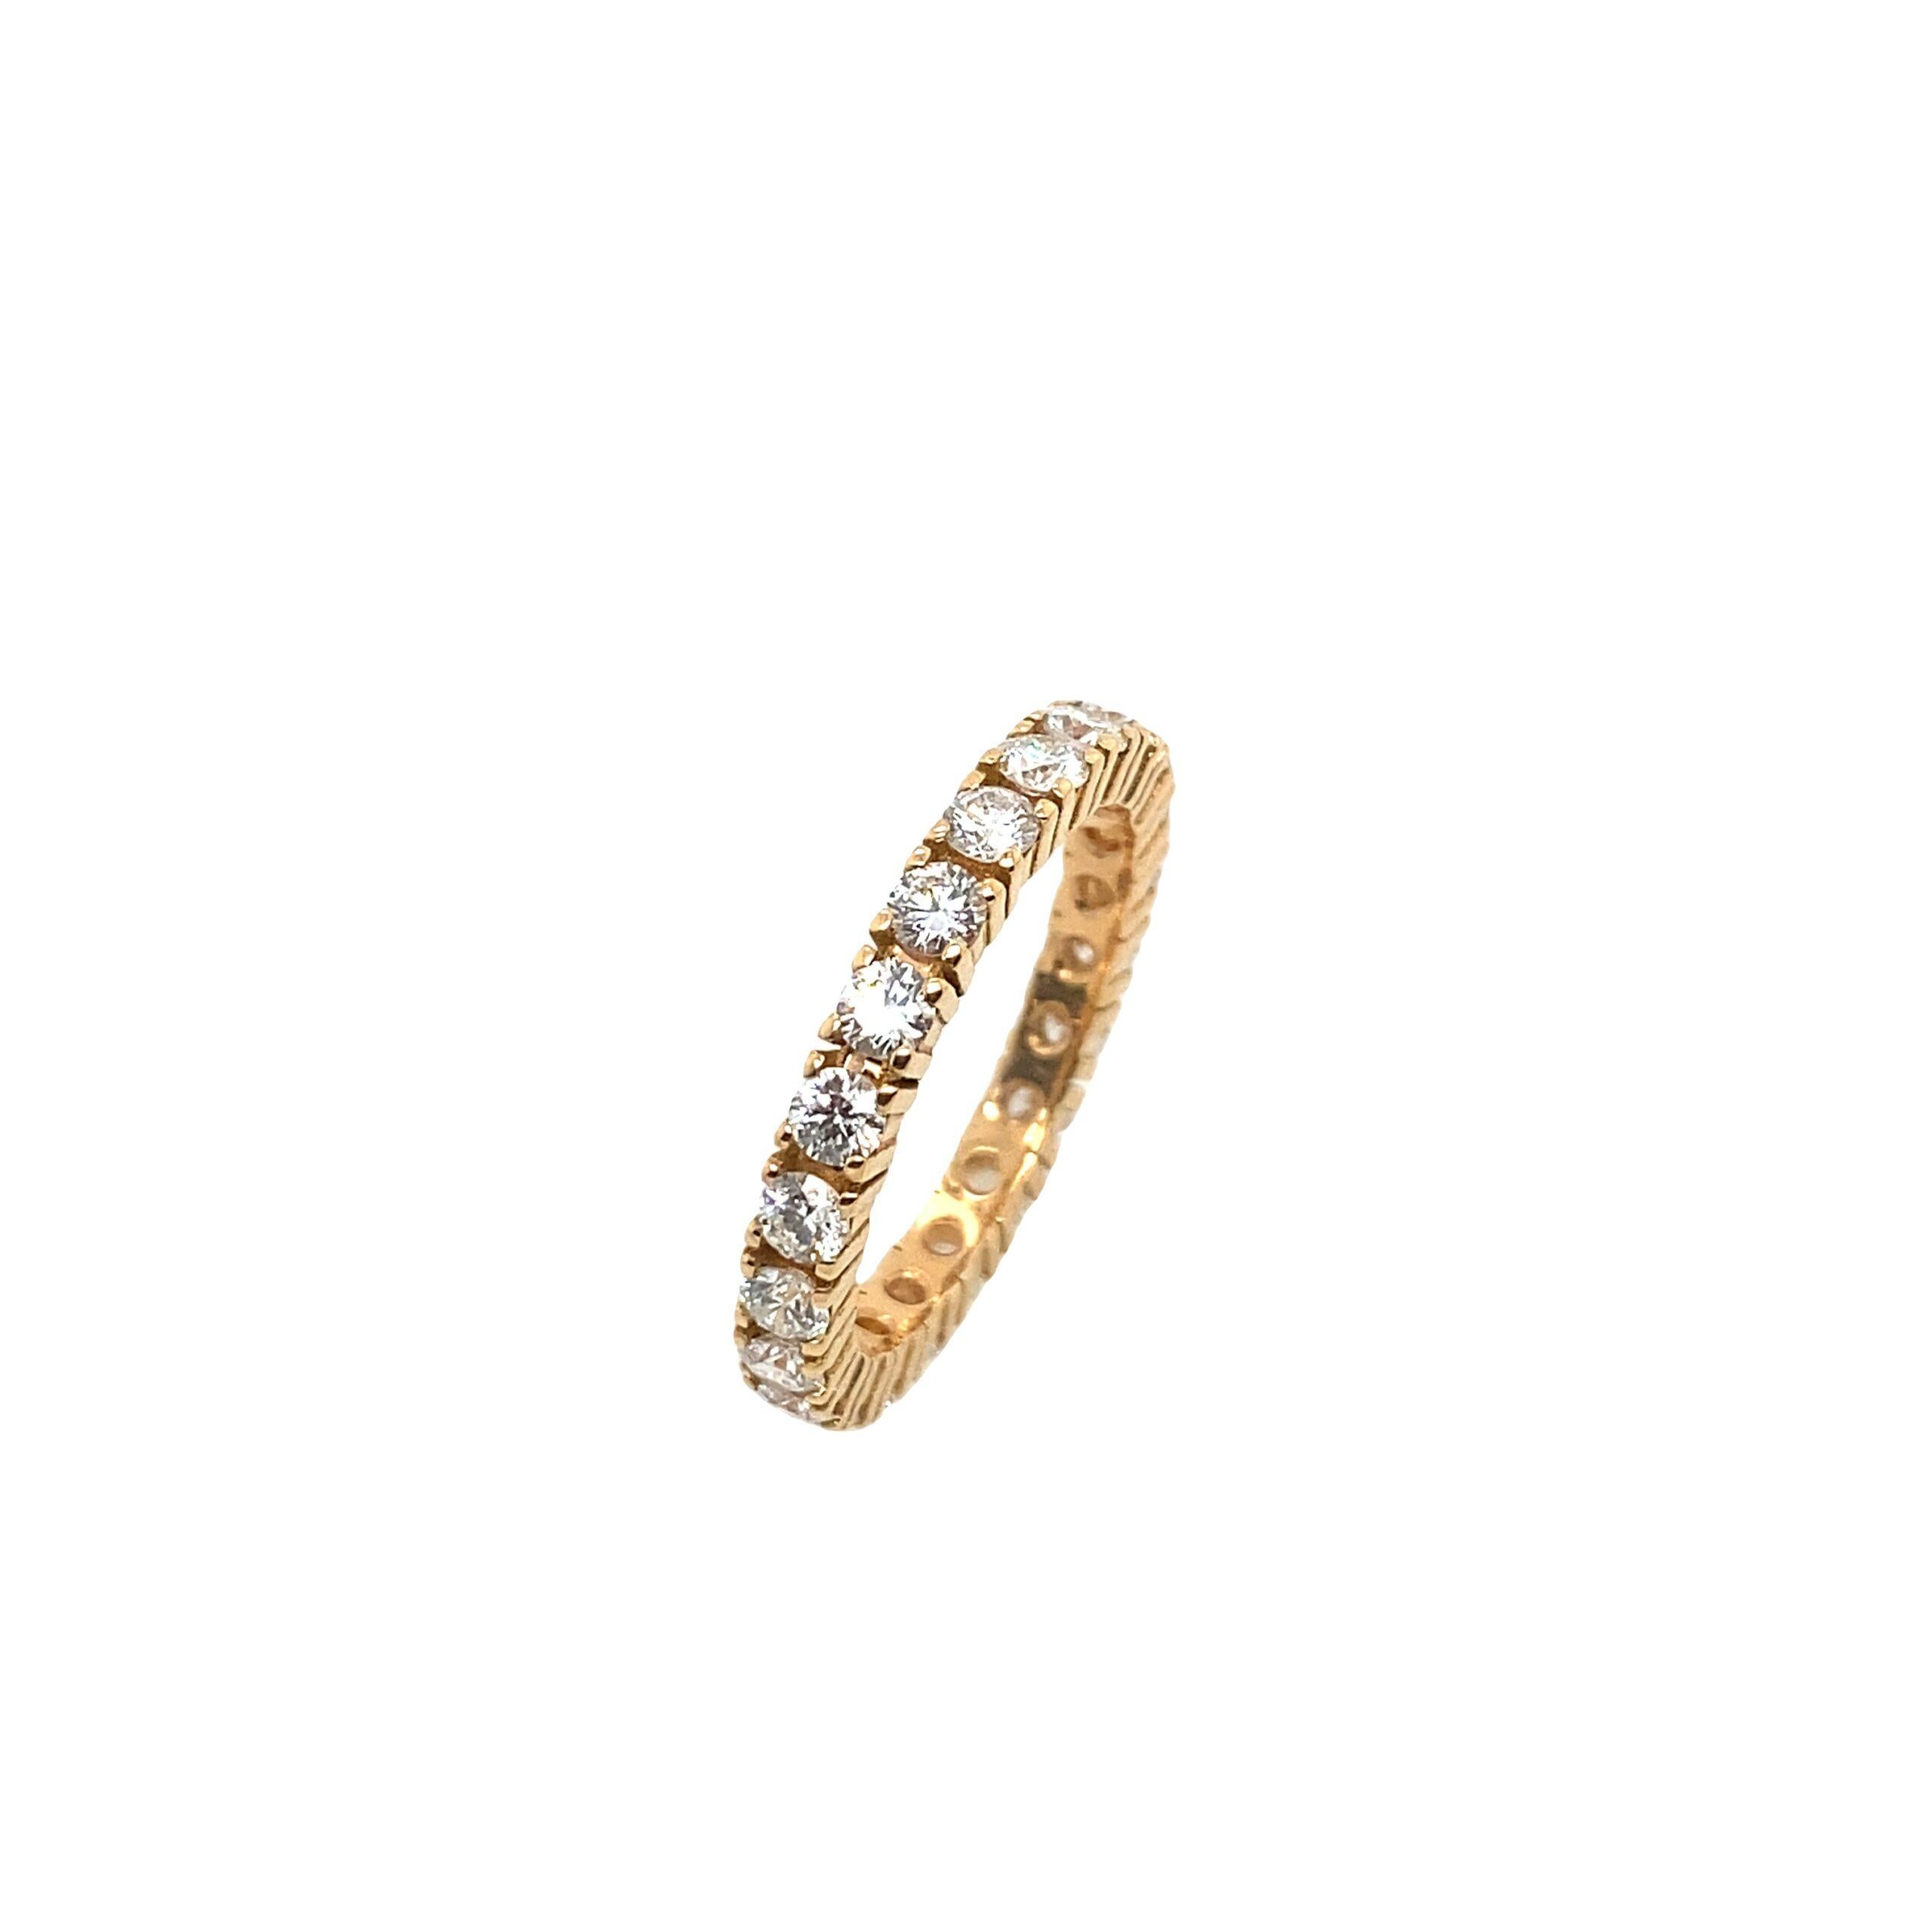 New 18ct Diamond Full Eternity Ring Set With 28 Round Brilliant Cut Diamonds

Additional Information:
With a 2.6mm Band
We can make any size to order
Total Diamond Weight: 1.40ct 
Diamond Colour: G
Diamond Clarity: VS1
Total Weight: 2.8g  
Ring